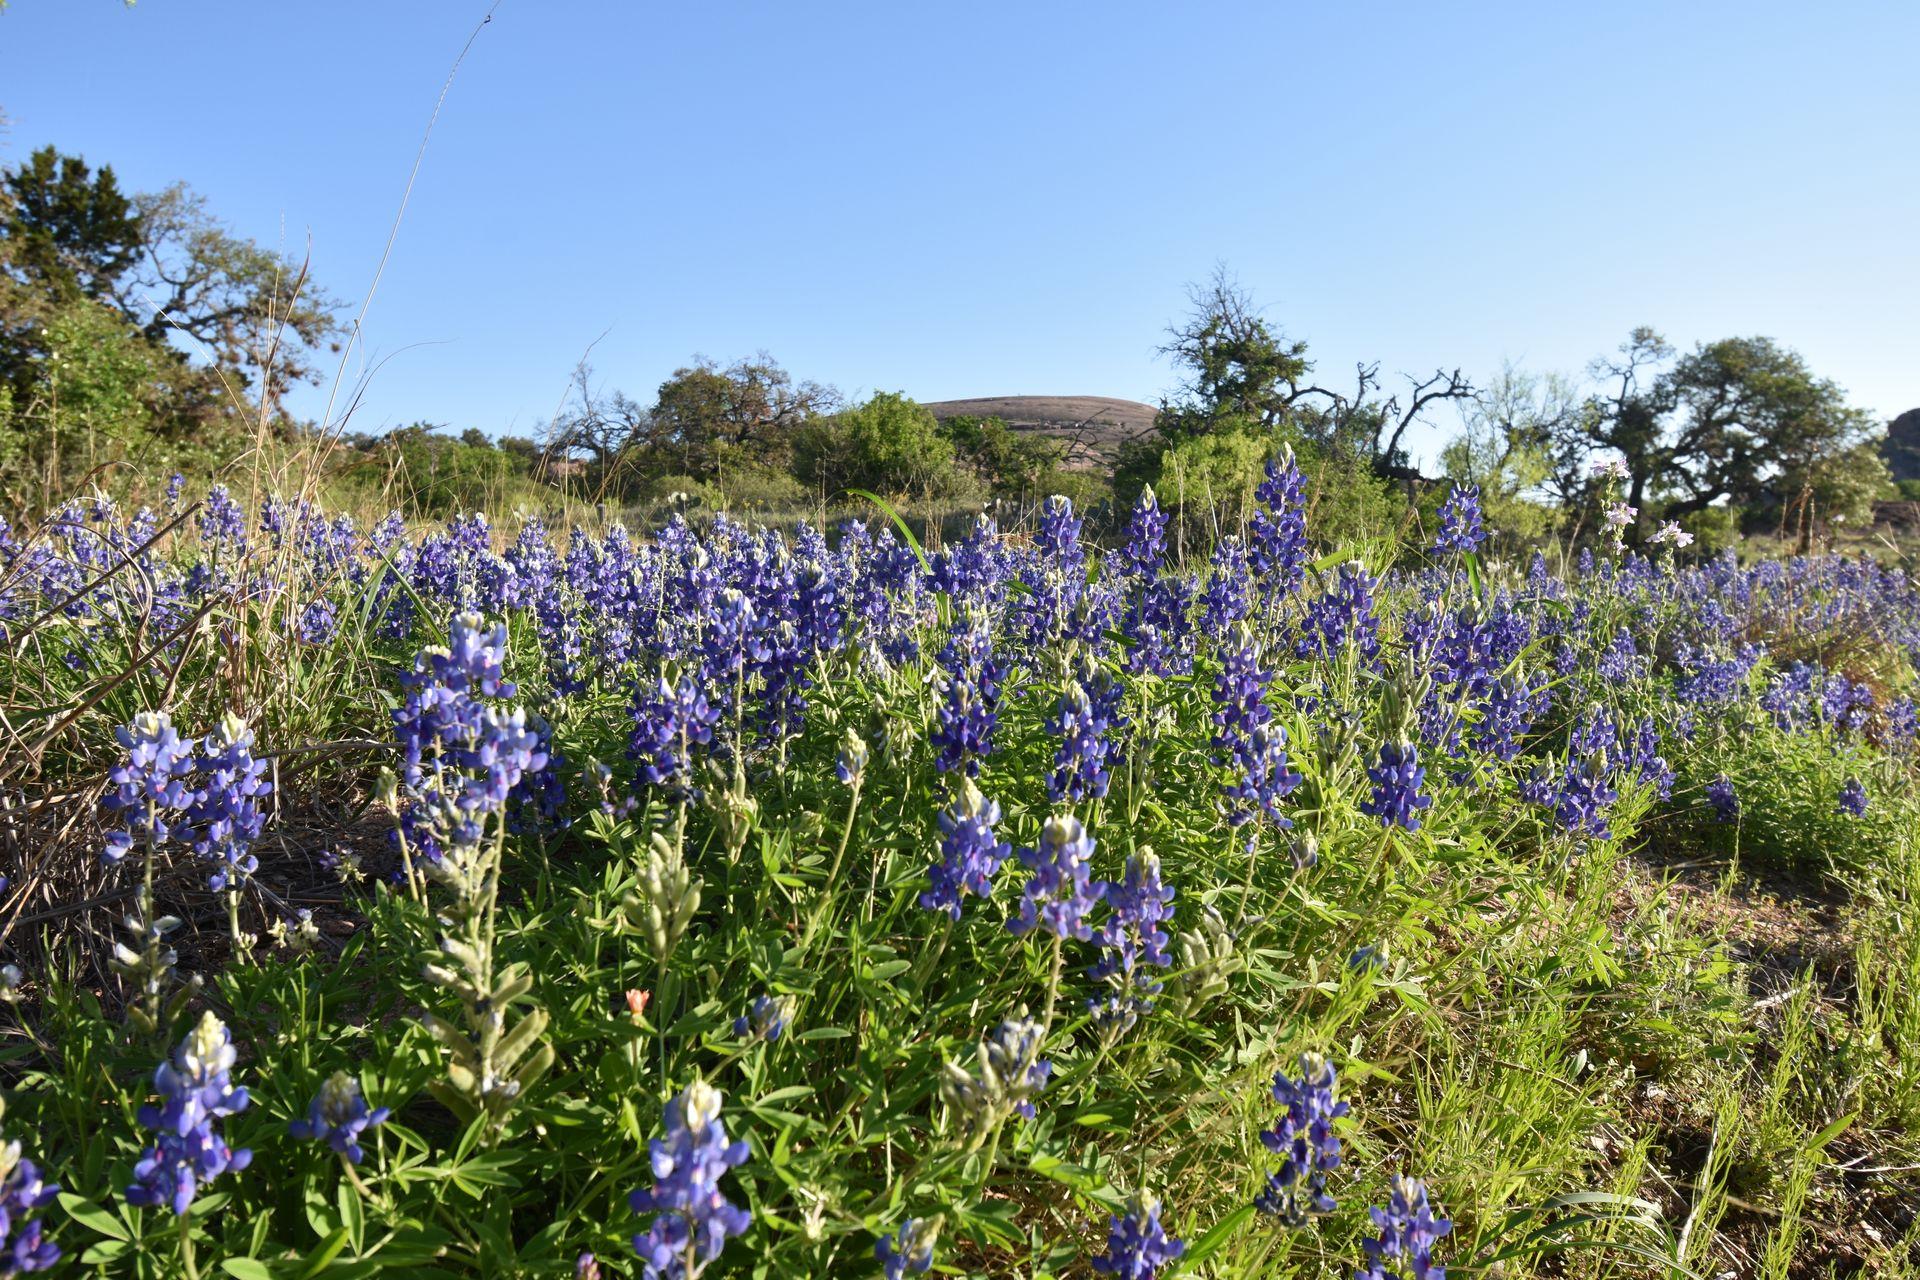 A view of bluebonnets with Enchanted Rock in the background.